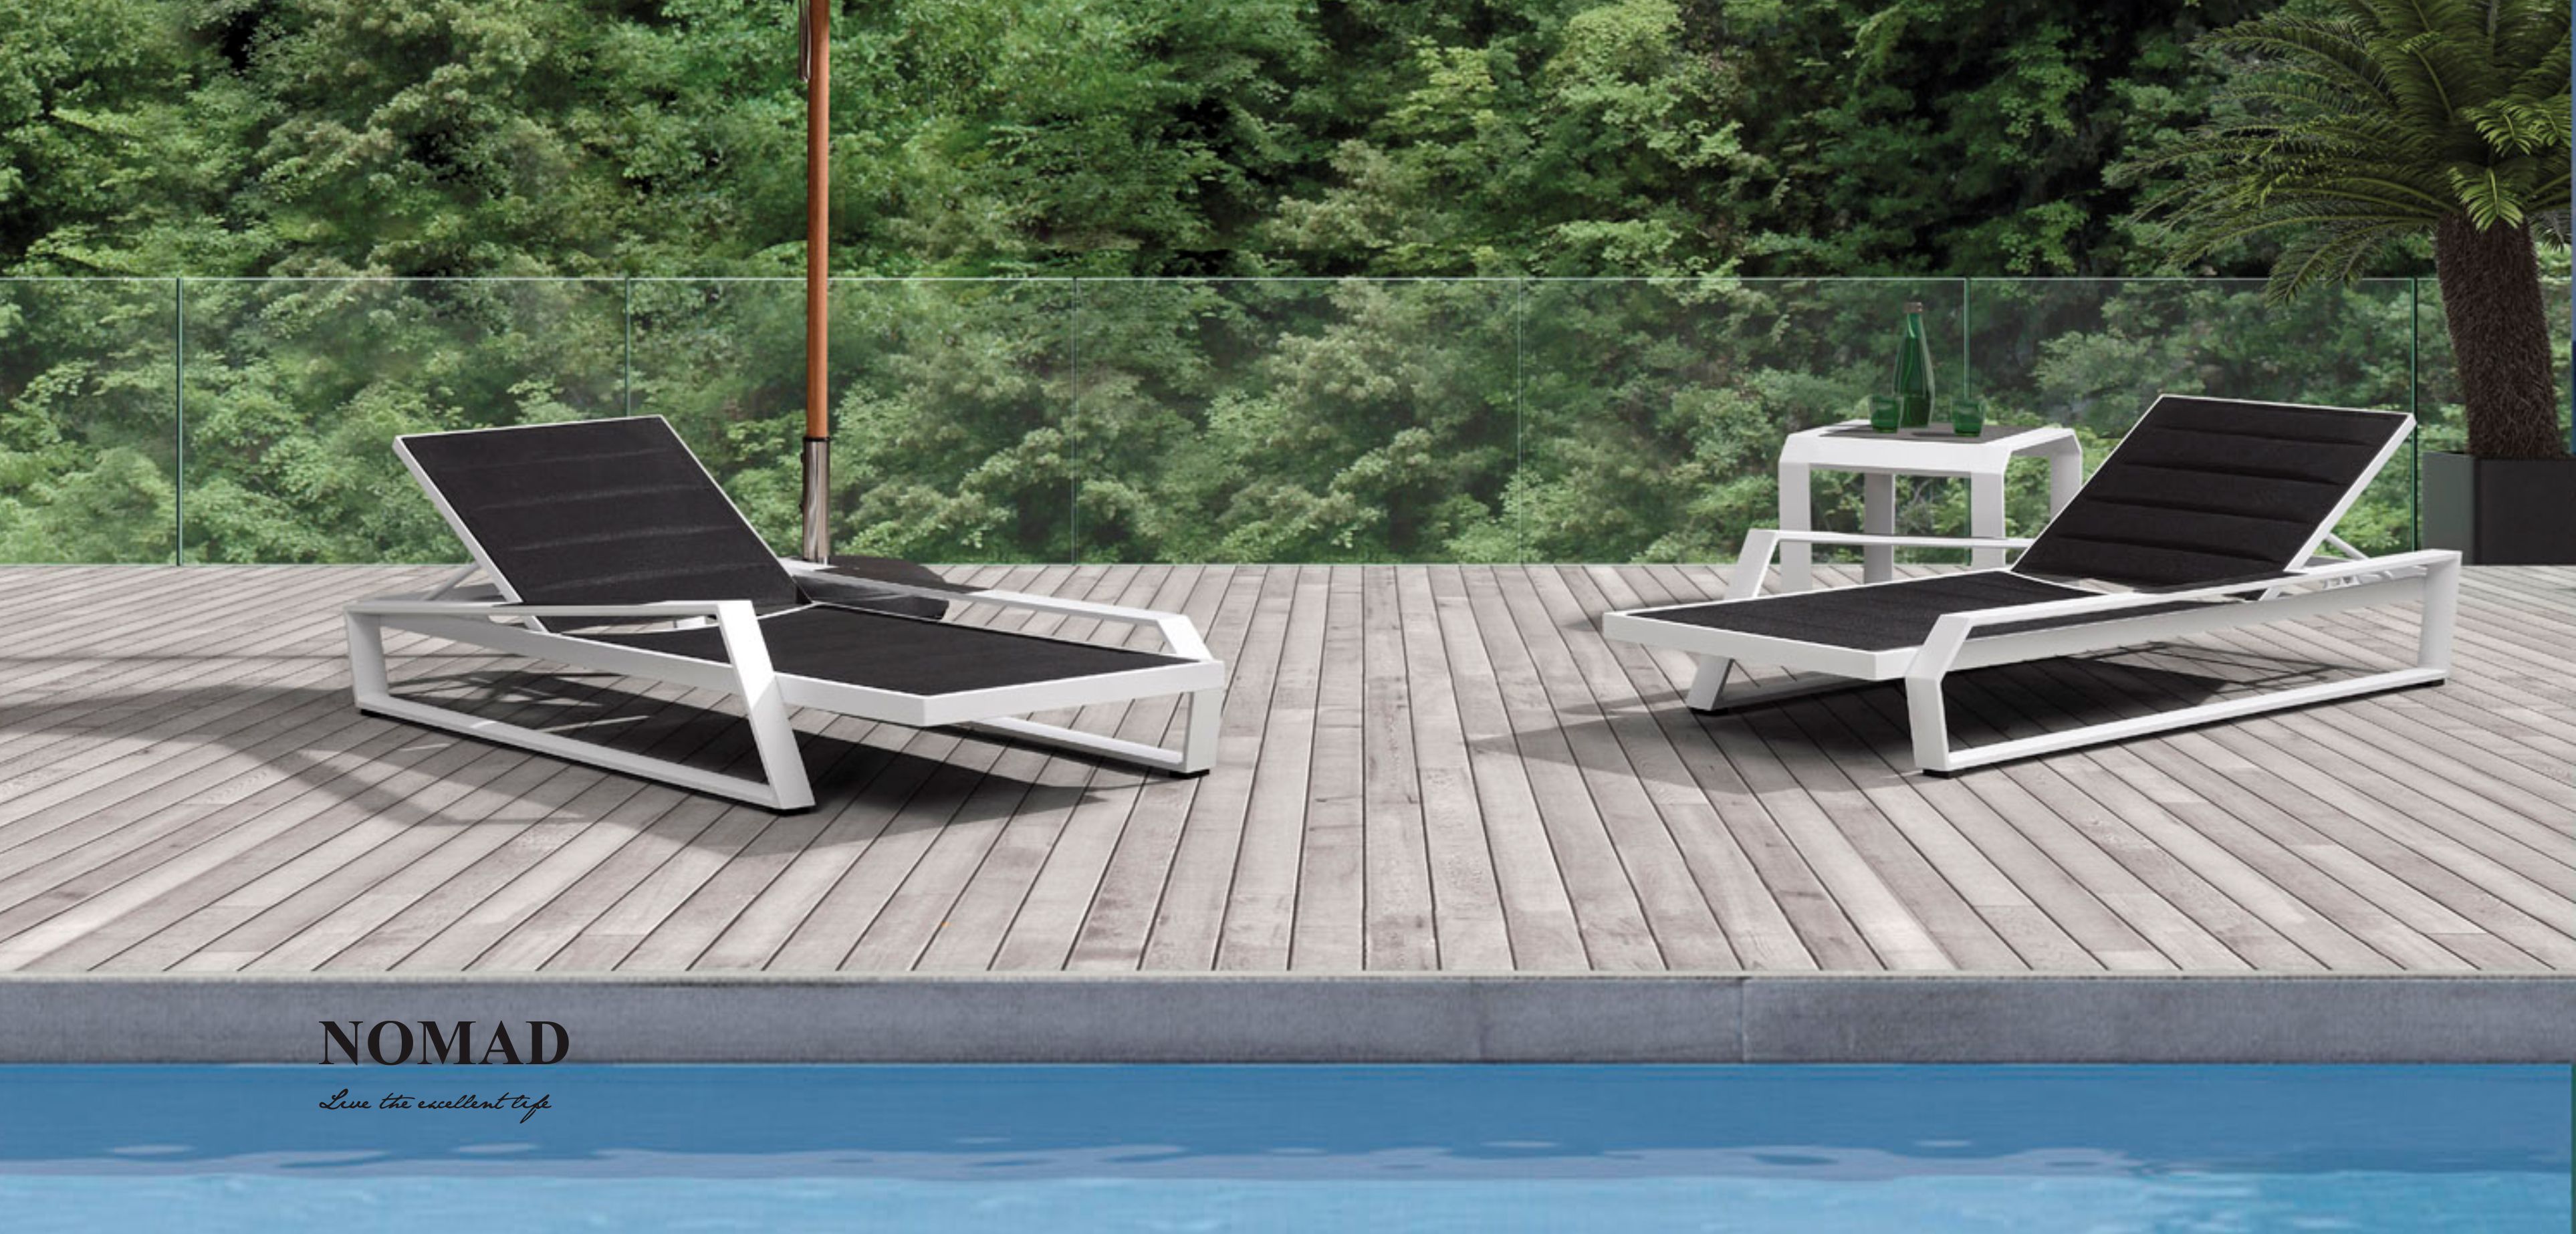 Nomad Chaise Lounger Set 201870